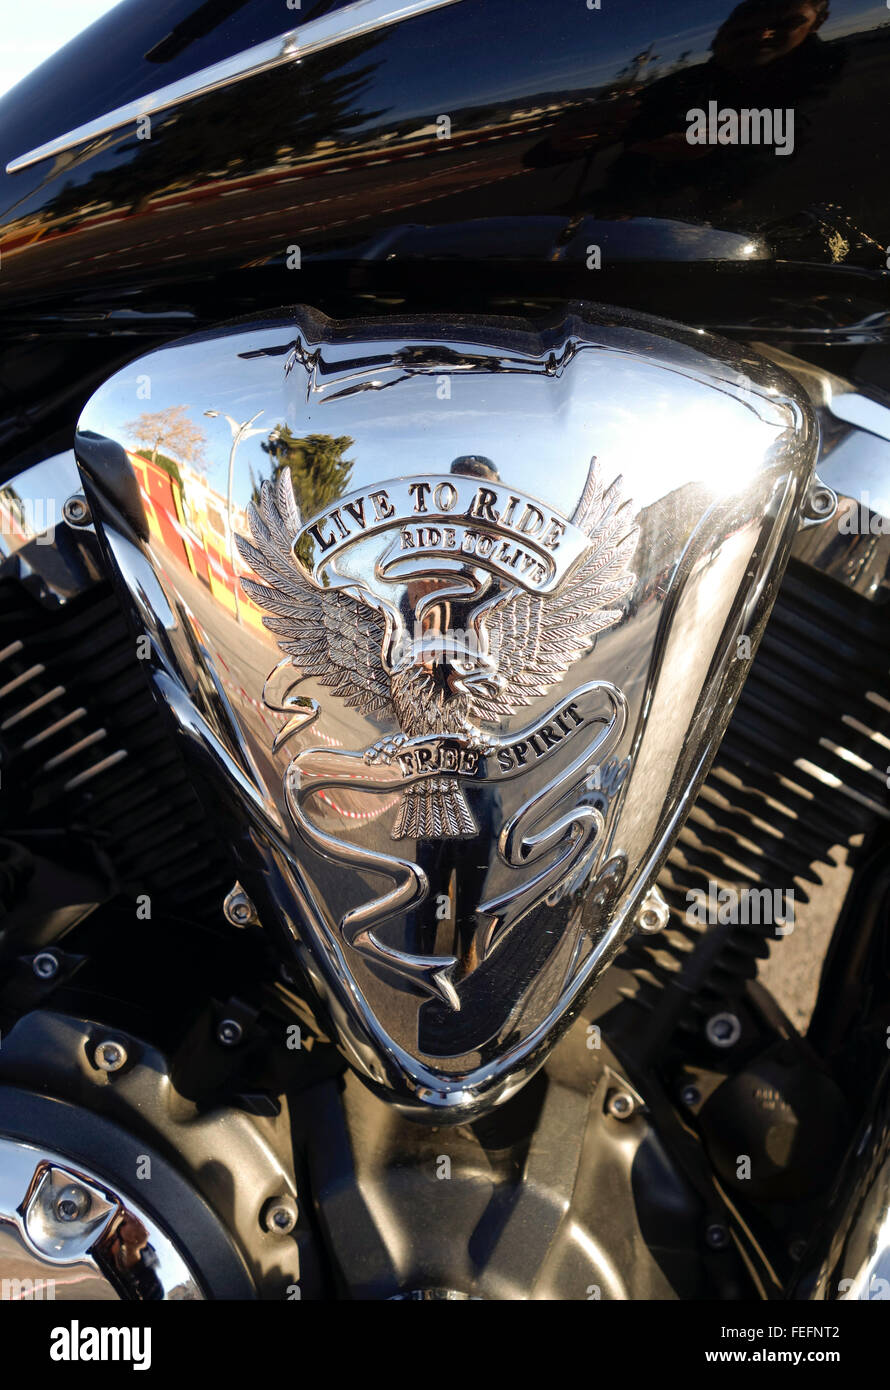 Live to ride, Ride to live engraved on air cleaner of motorcycle. Stock Photo